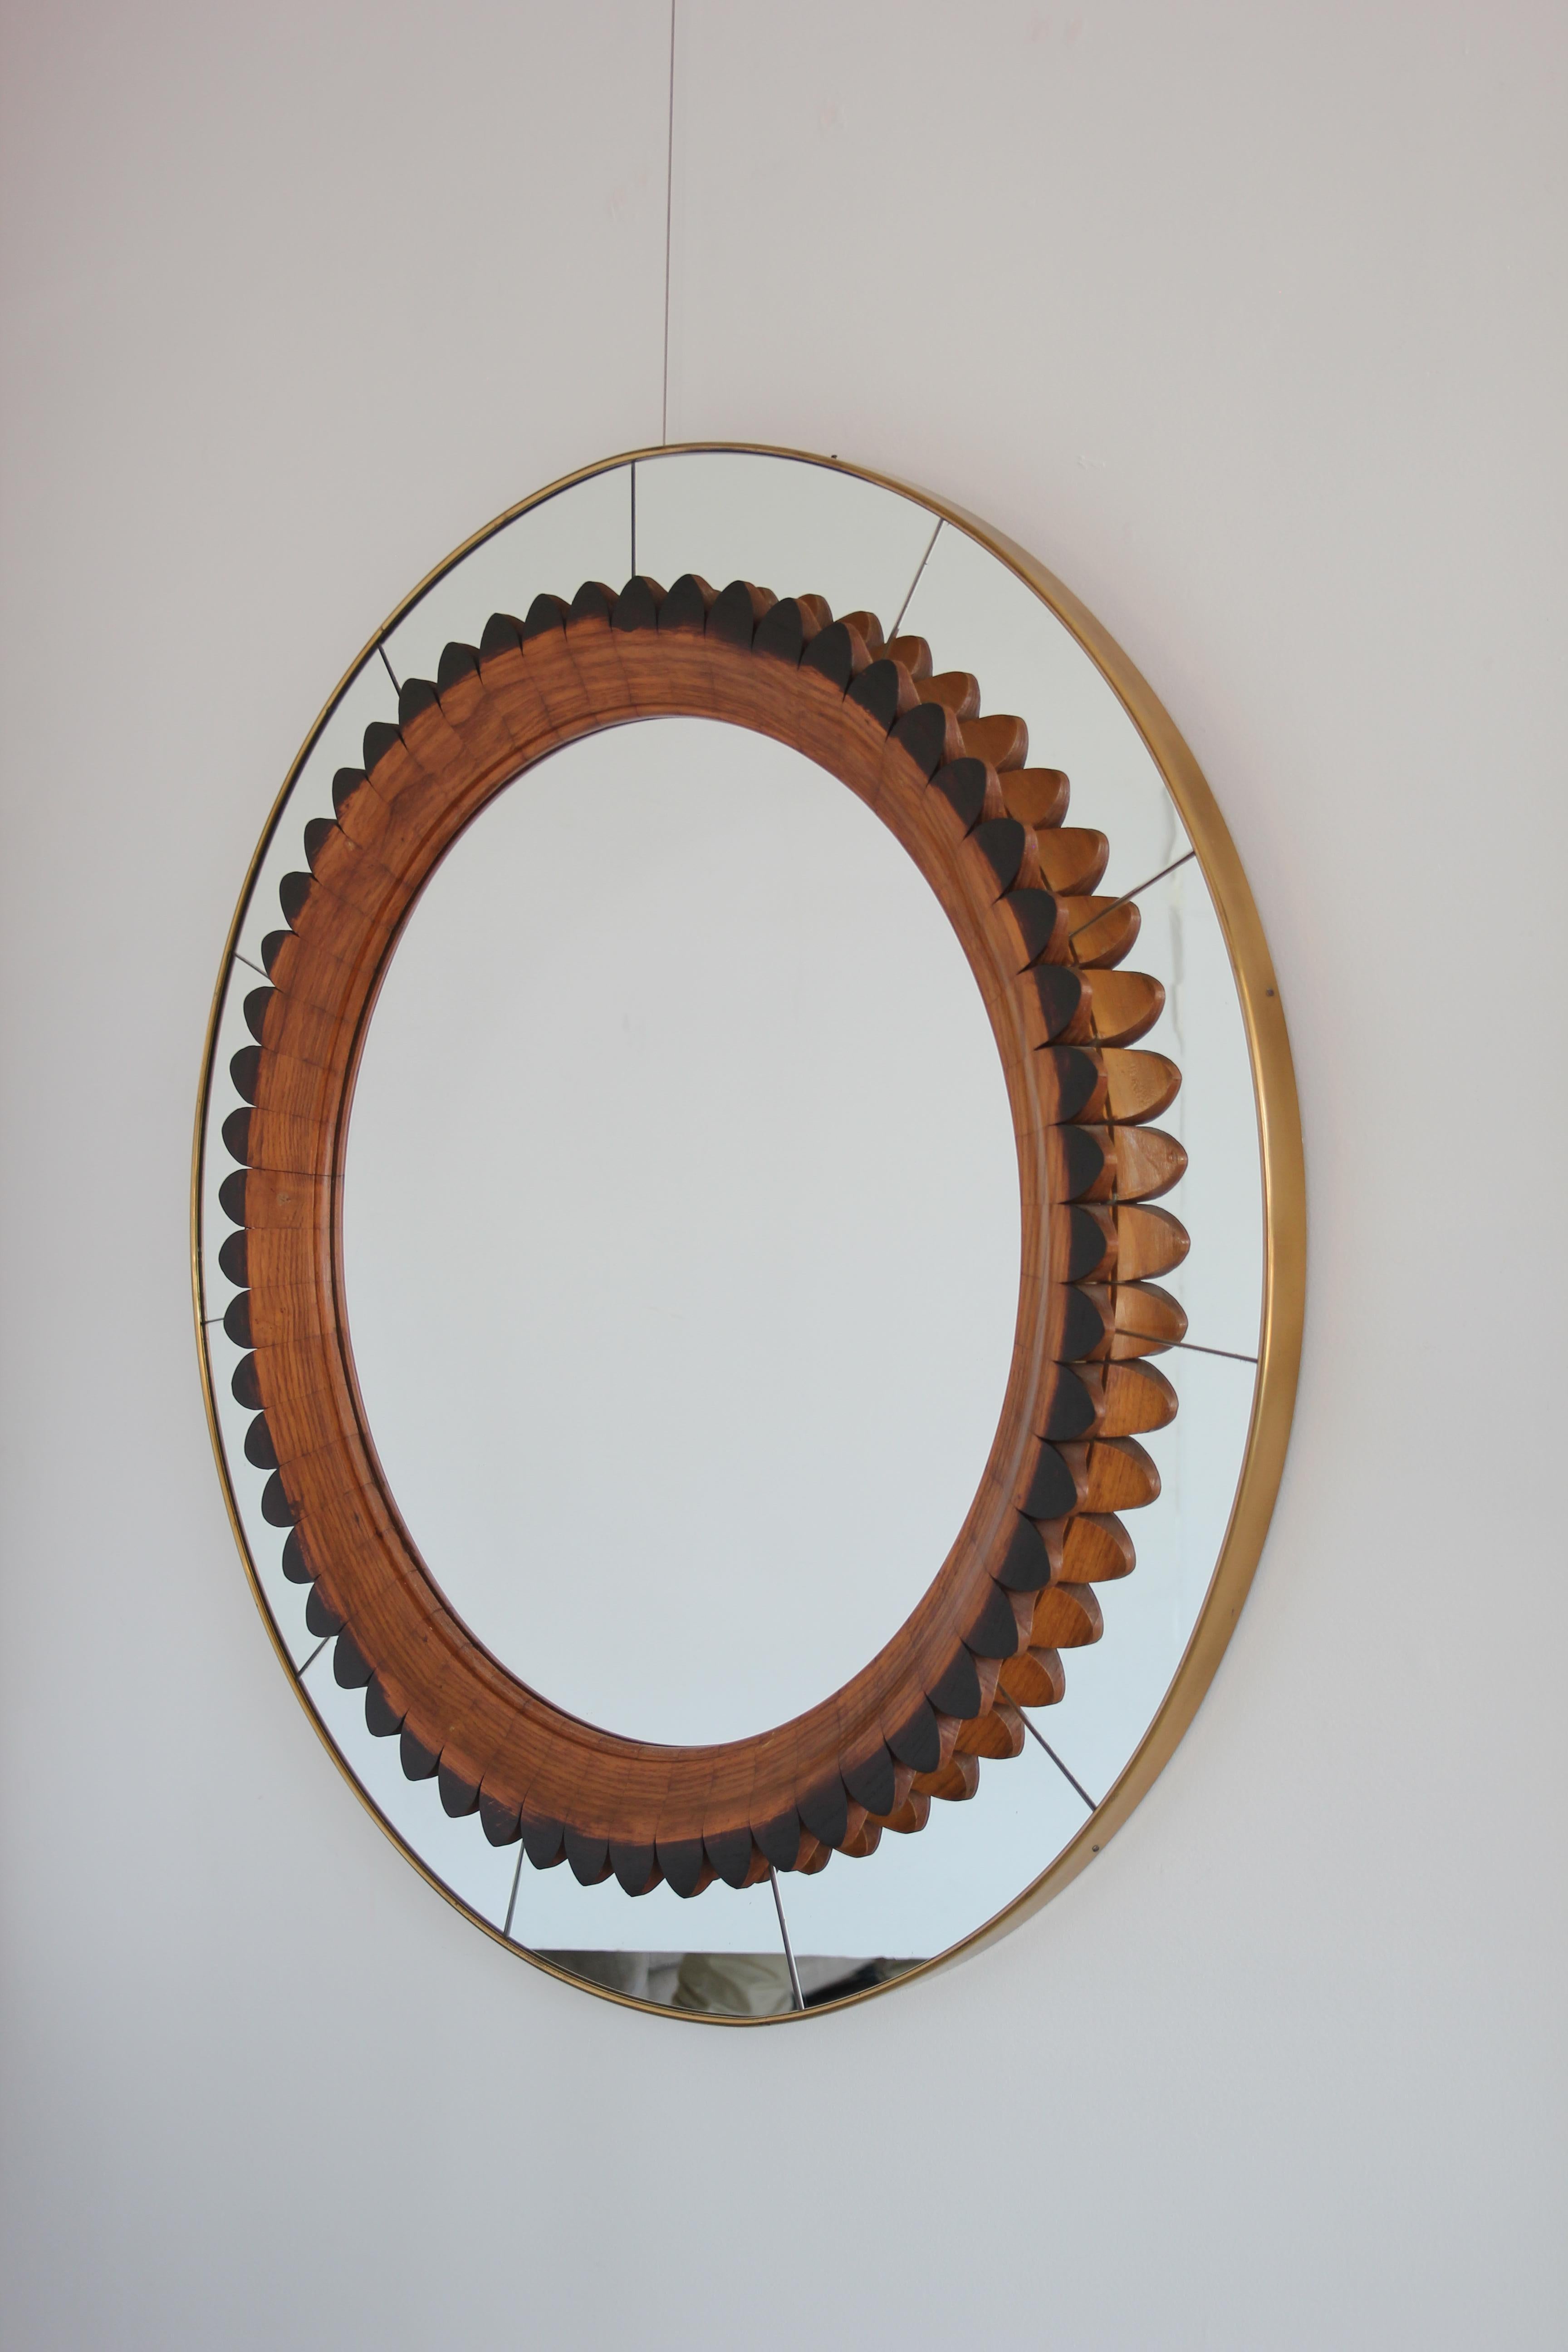 Rare Italian mirror designed by Fratelli Marelli for Framar, circa 1940s.
Walnut scalloped detailing
Wonderful patina and condition of mirror.